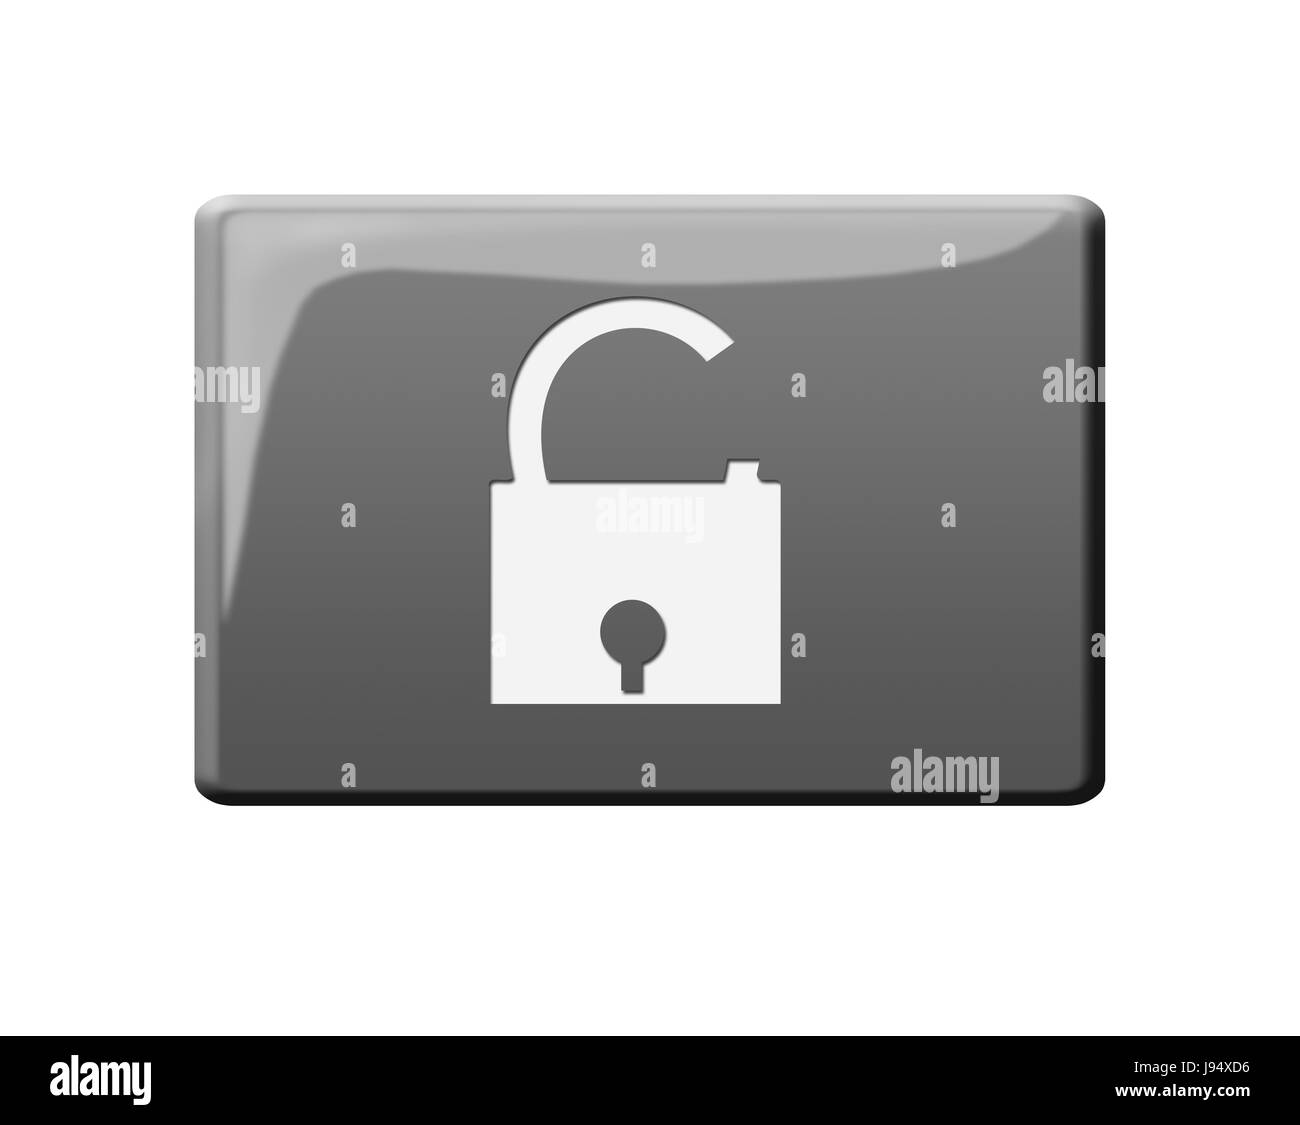 certain, button, safe, login, logout, isolated, optional, symbolic, to lock, Stock Photo